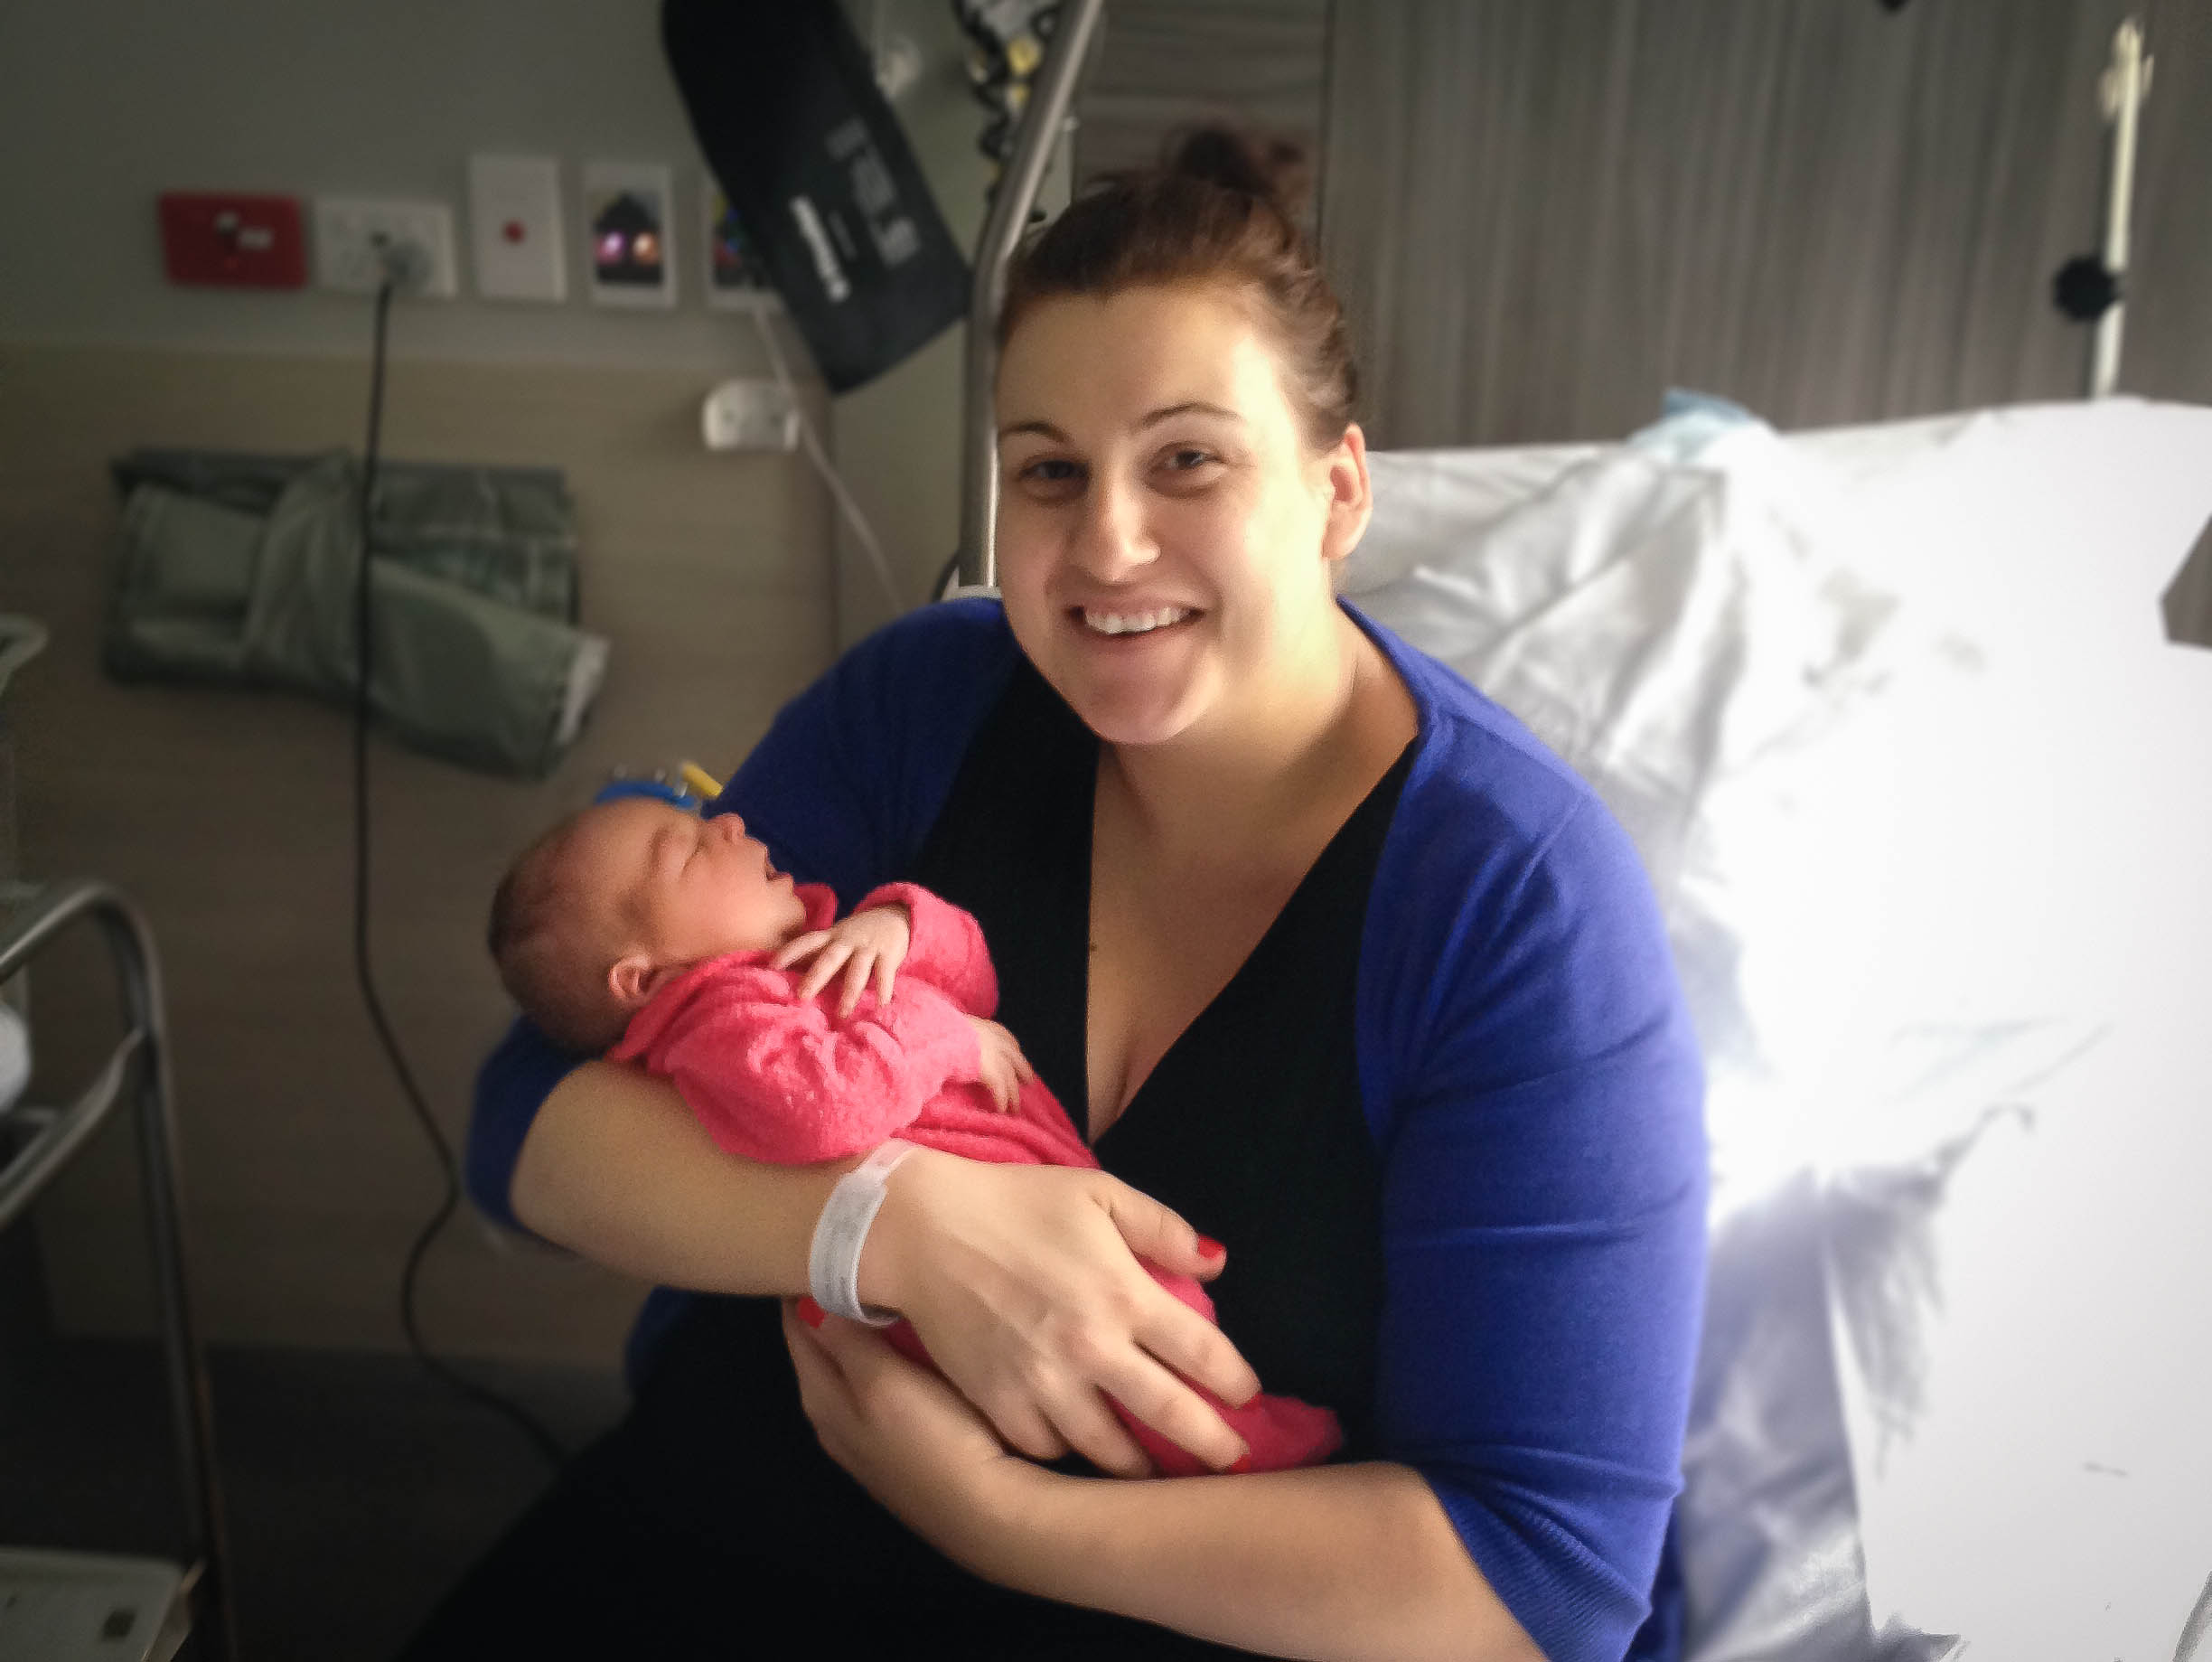 Laura Loricco welcomed daughter Grace born on Thursday, 27th of February 2014 in Geelong, Australia.